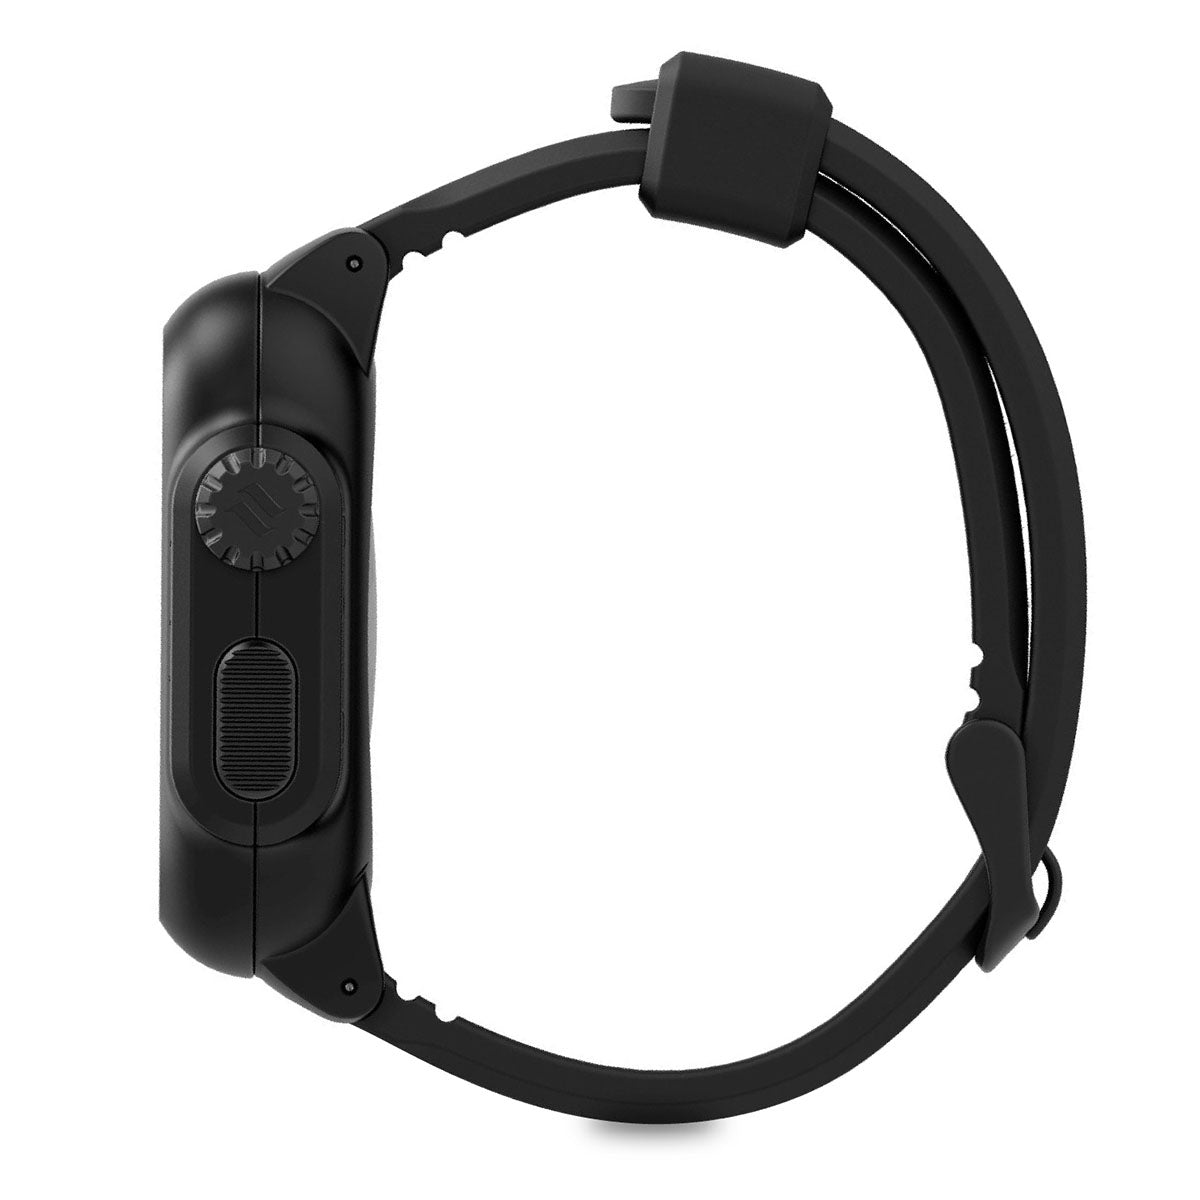 catalyst apple watch series 3 42mm waterproof case band showing the side view of the catalyst waterproof case with the rotating dial and button for apple watch